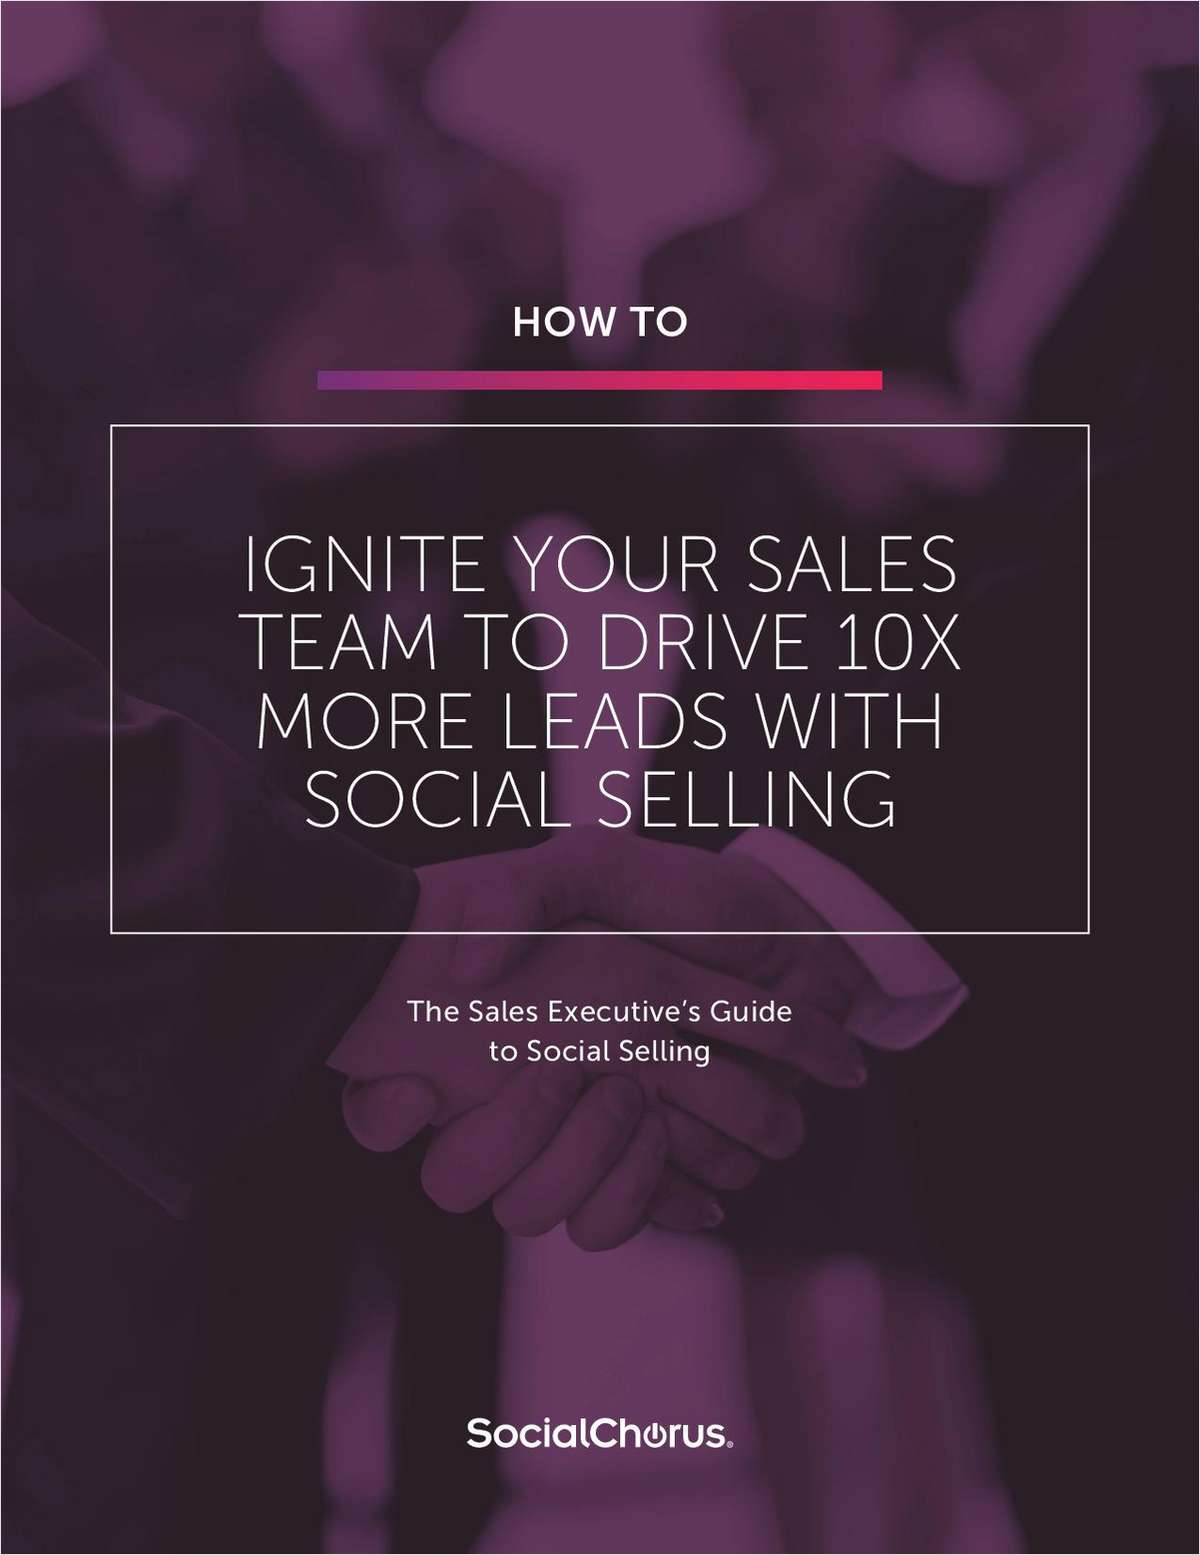 How to Ignite Your Sales Team to Drive 10X More Leads with Social Selling